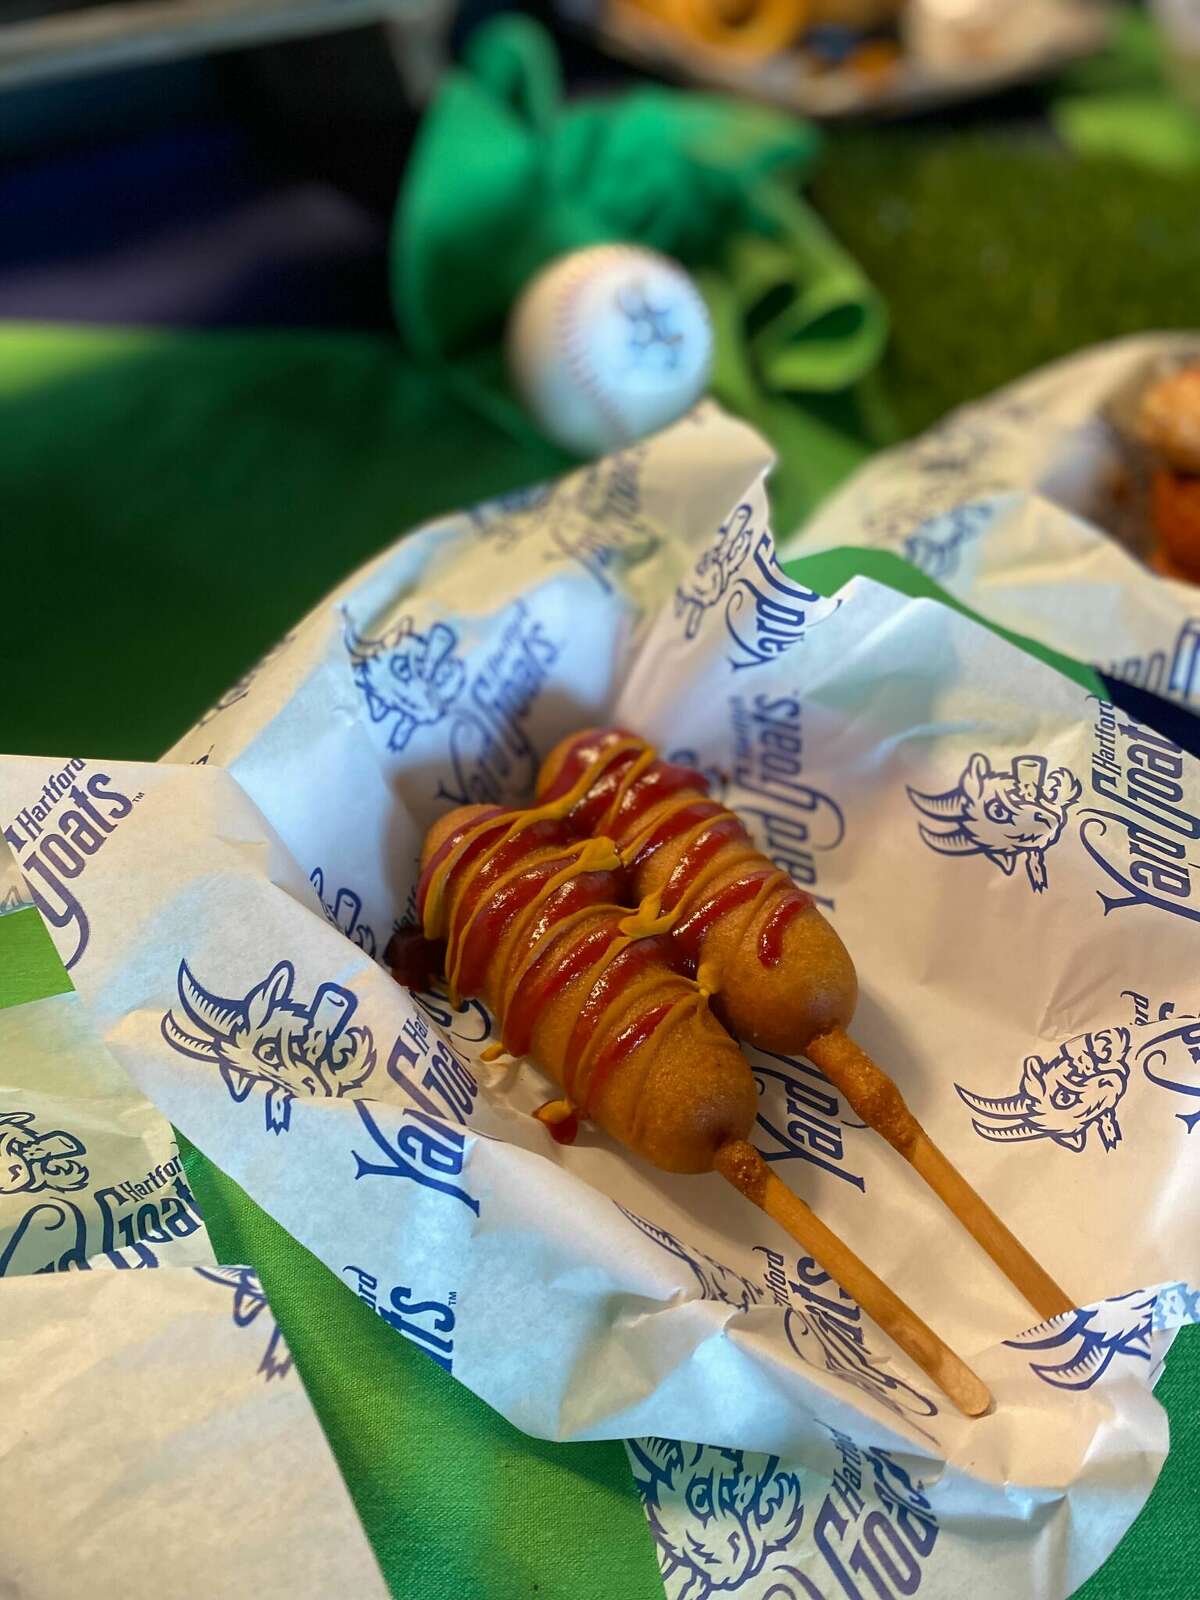 The classic corn dog is among the snacks at Dunkin' Park this season.